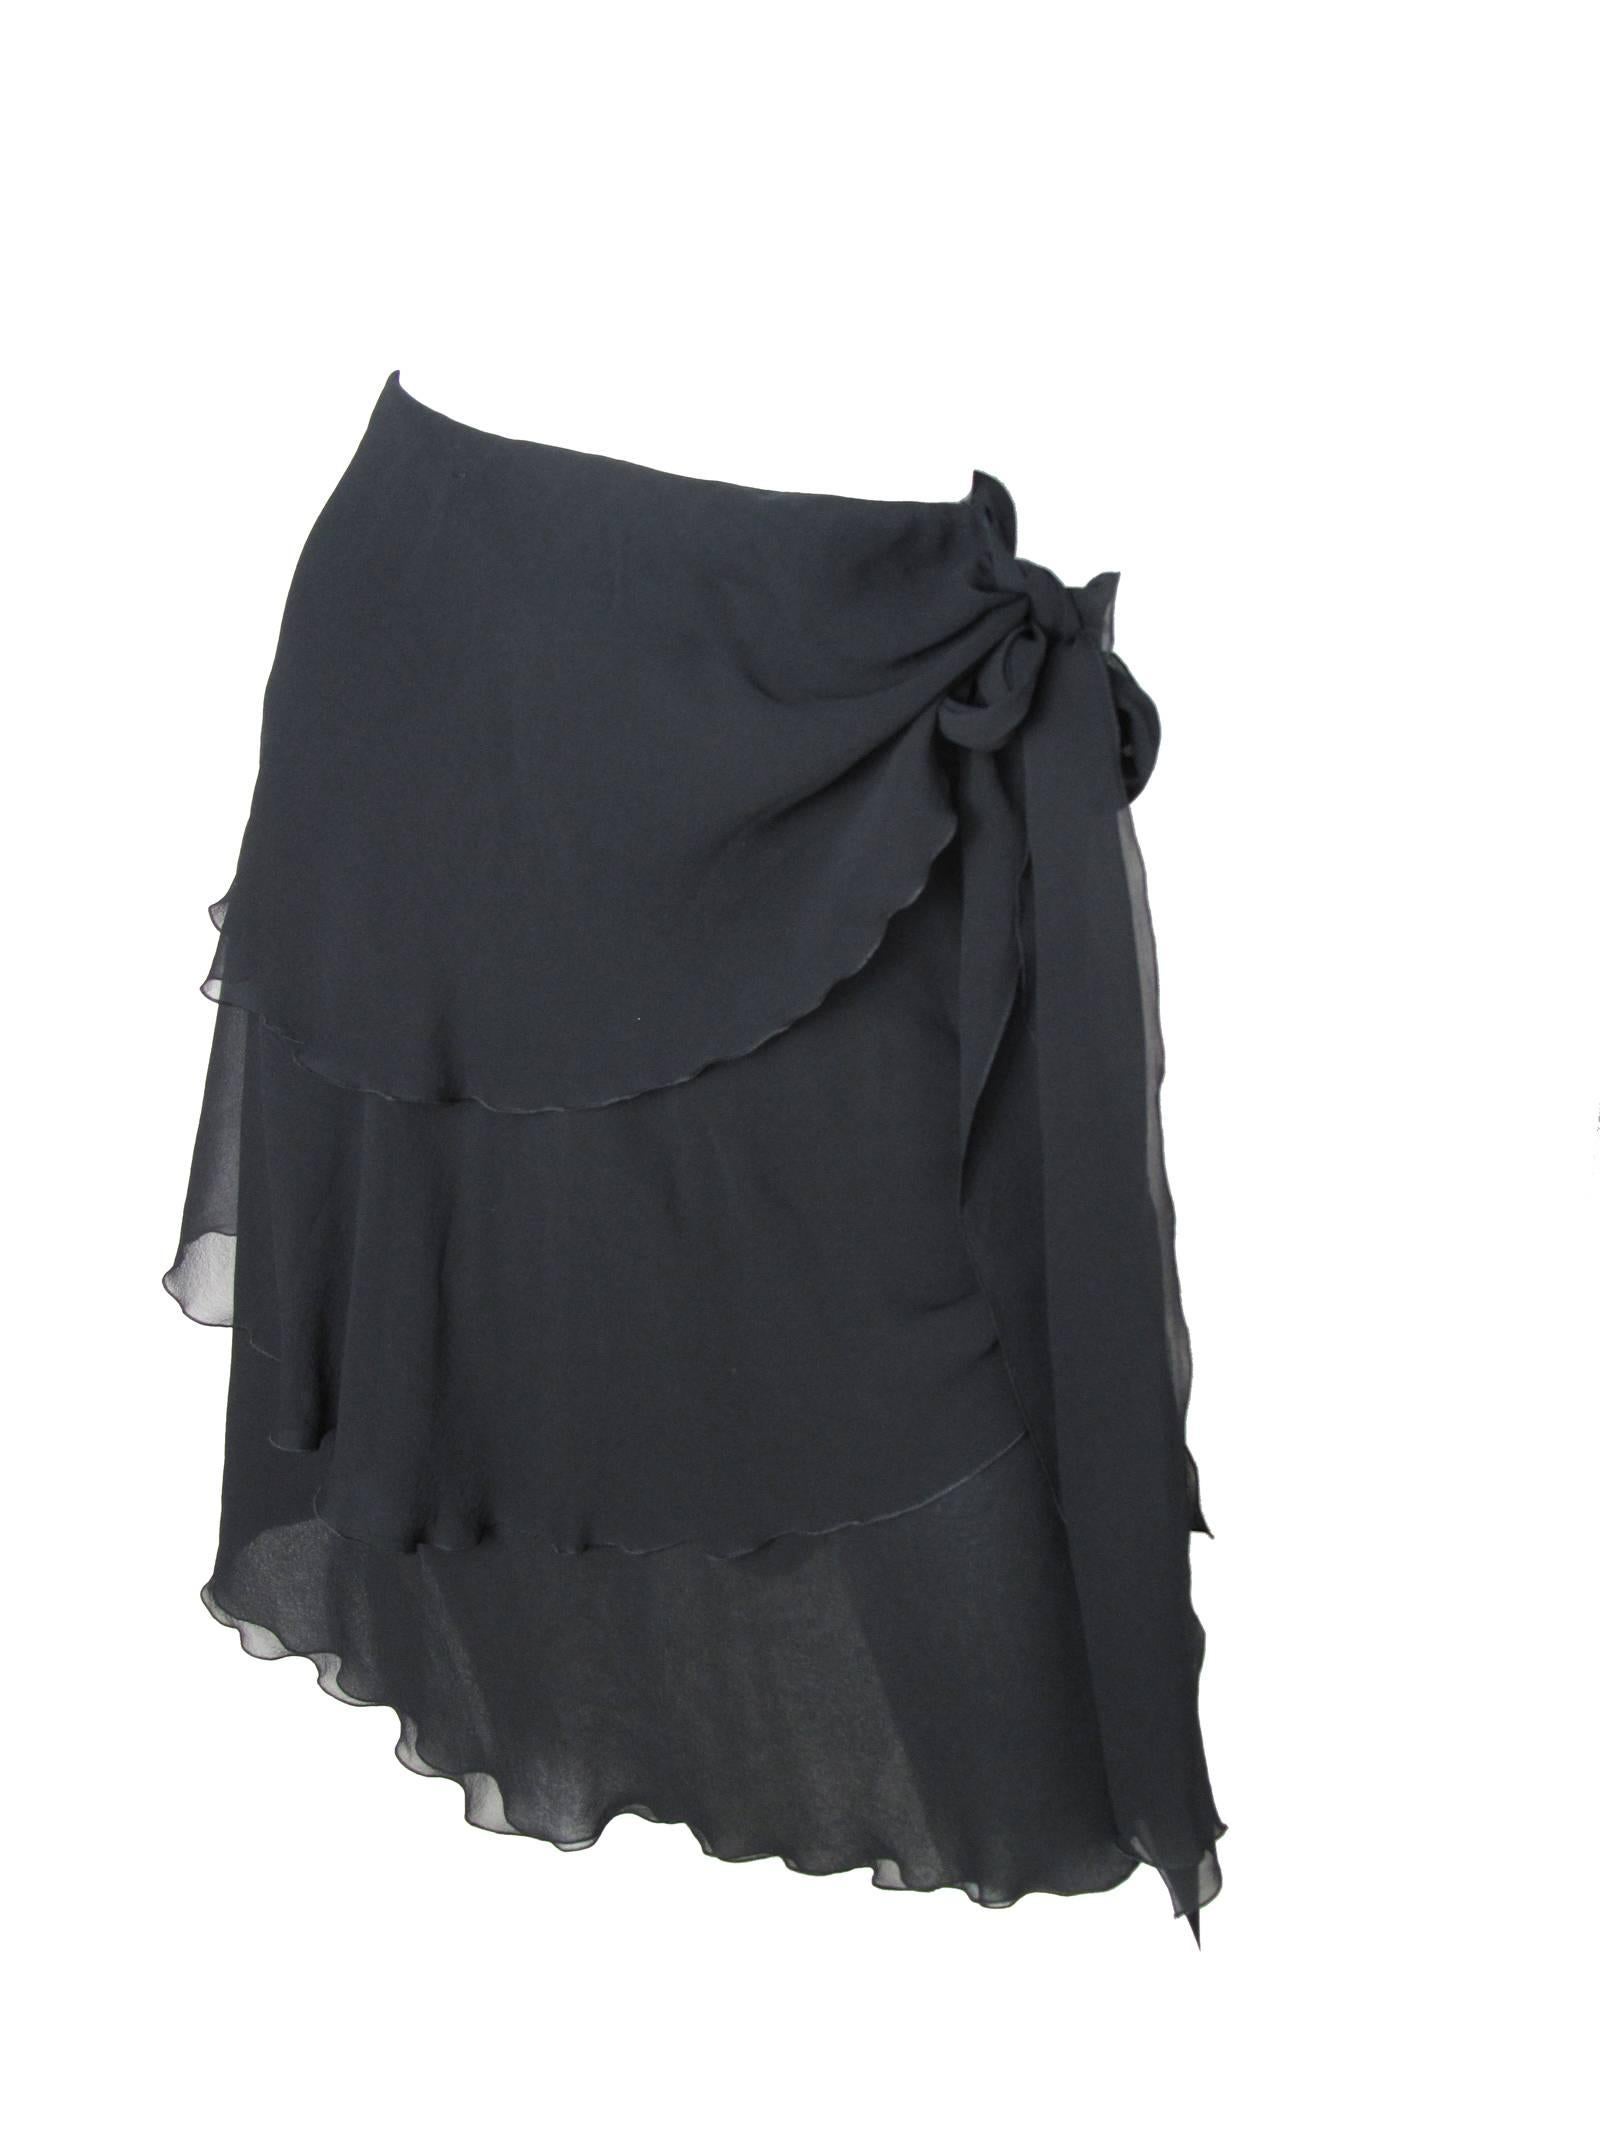 2000 Chanel black silk chiffon ruffle skirt with two ties on side.  Condition: Excellent. Size 36

We accept returns for refund, please see our terms.  We offer free ground shipping within the US.  Please let us know if you have any questions. 
